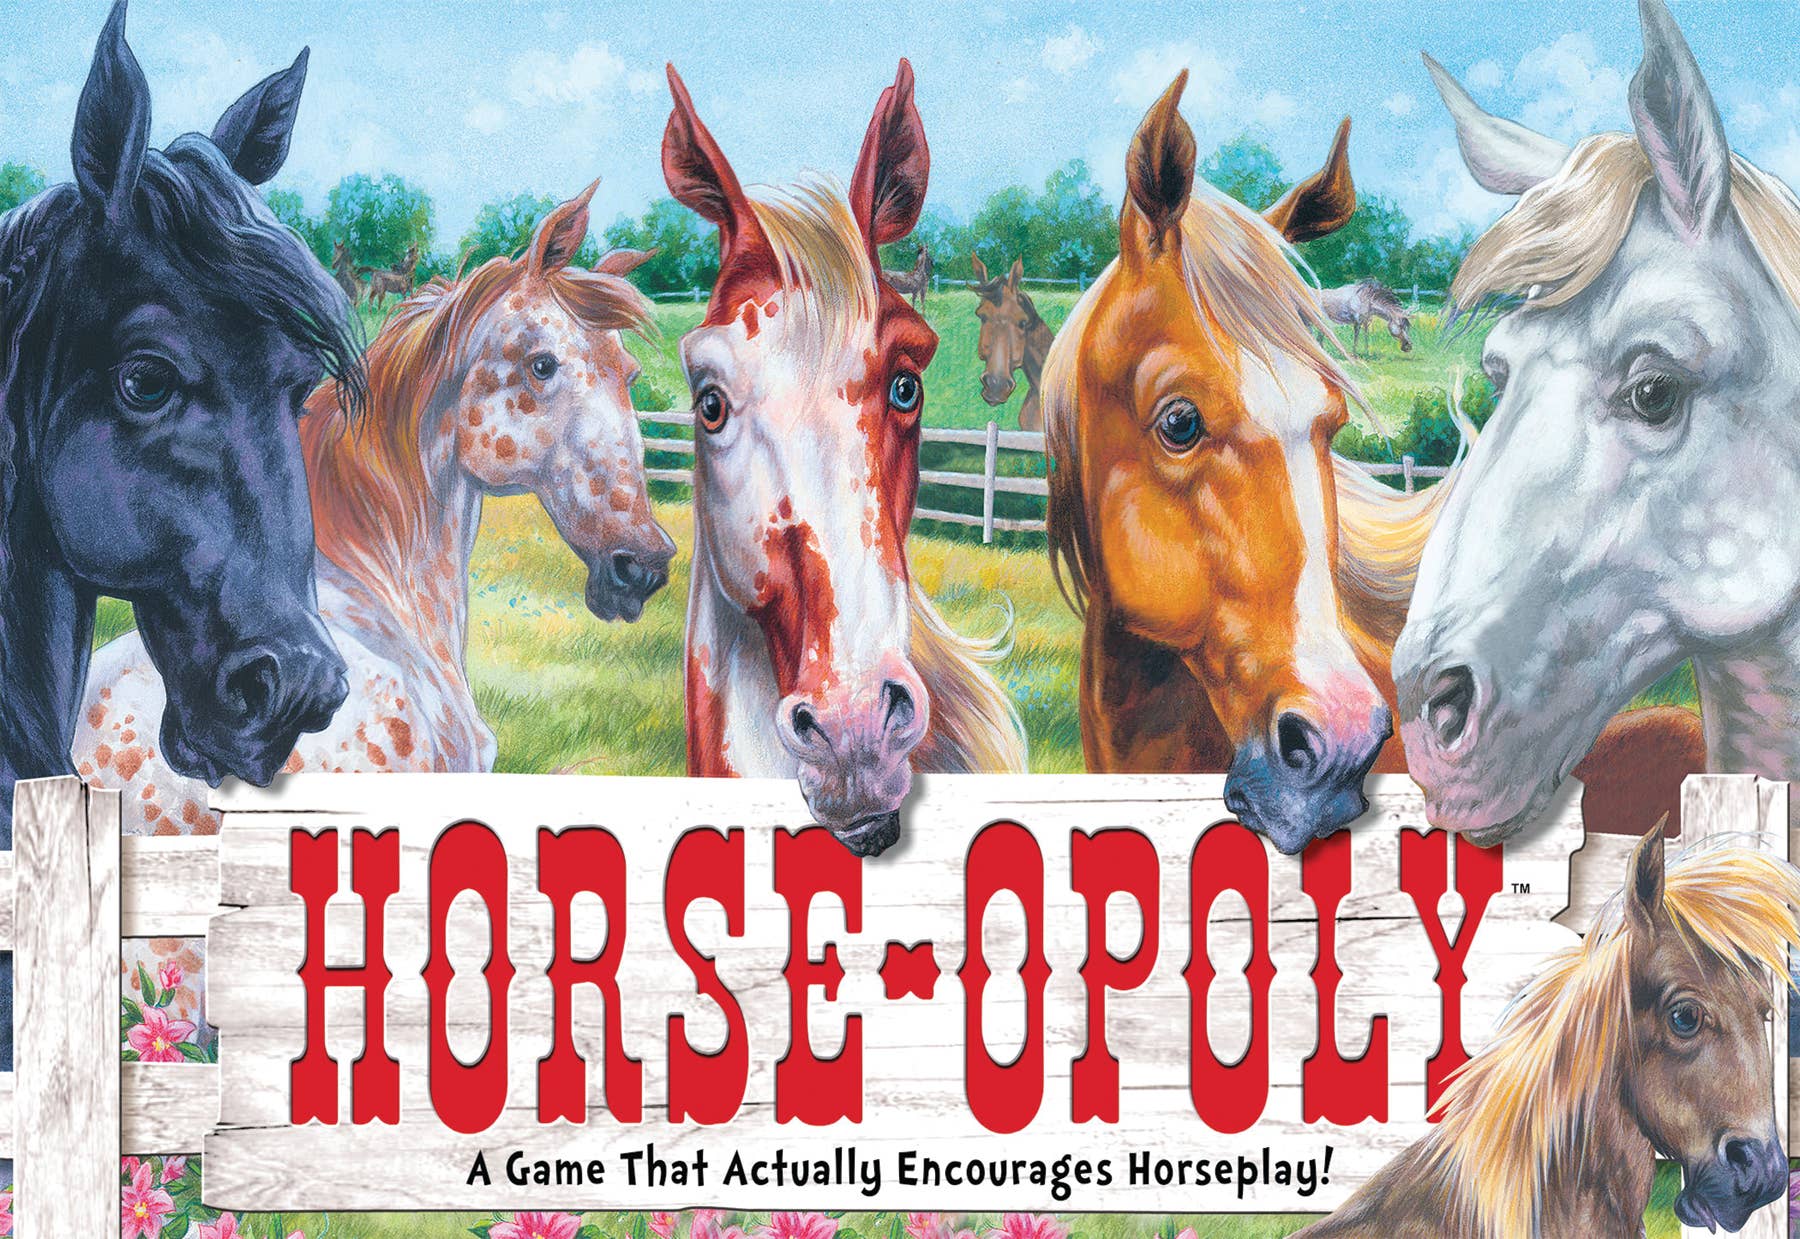 Horse Opoly, A game that actually encourage horseplay. Fun gift for equine lovers and enthusiasts.